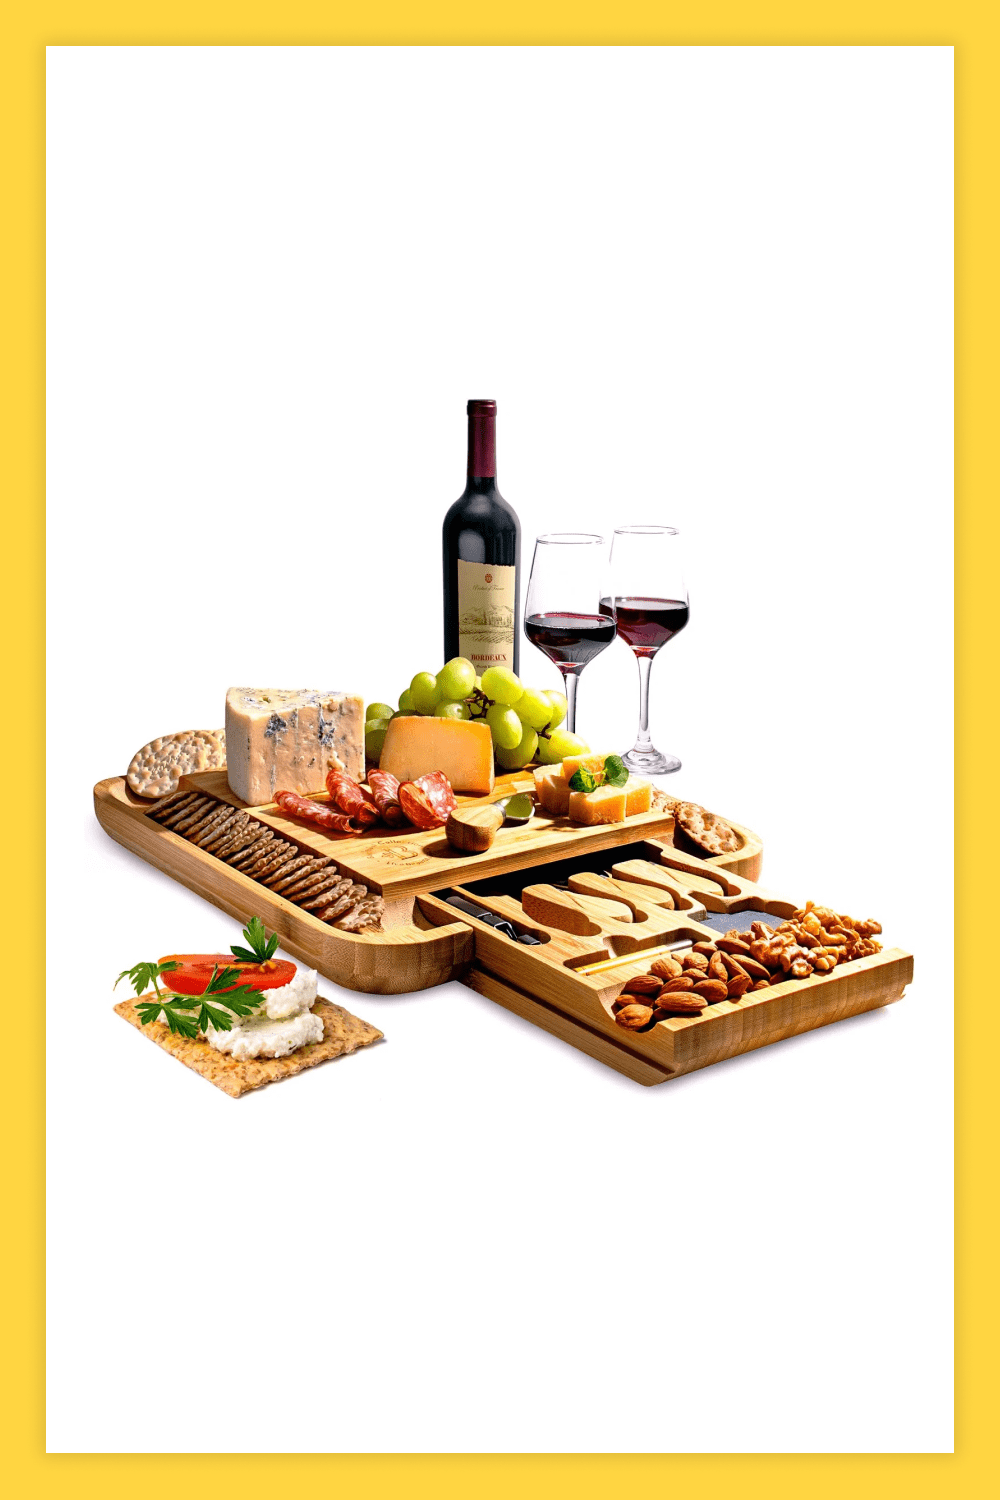 Bamboo Dessert Plates Charcuterie Boards & Knife Accessories.